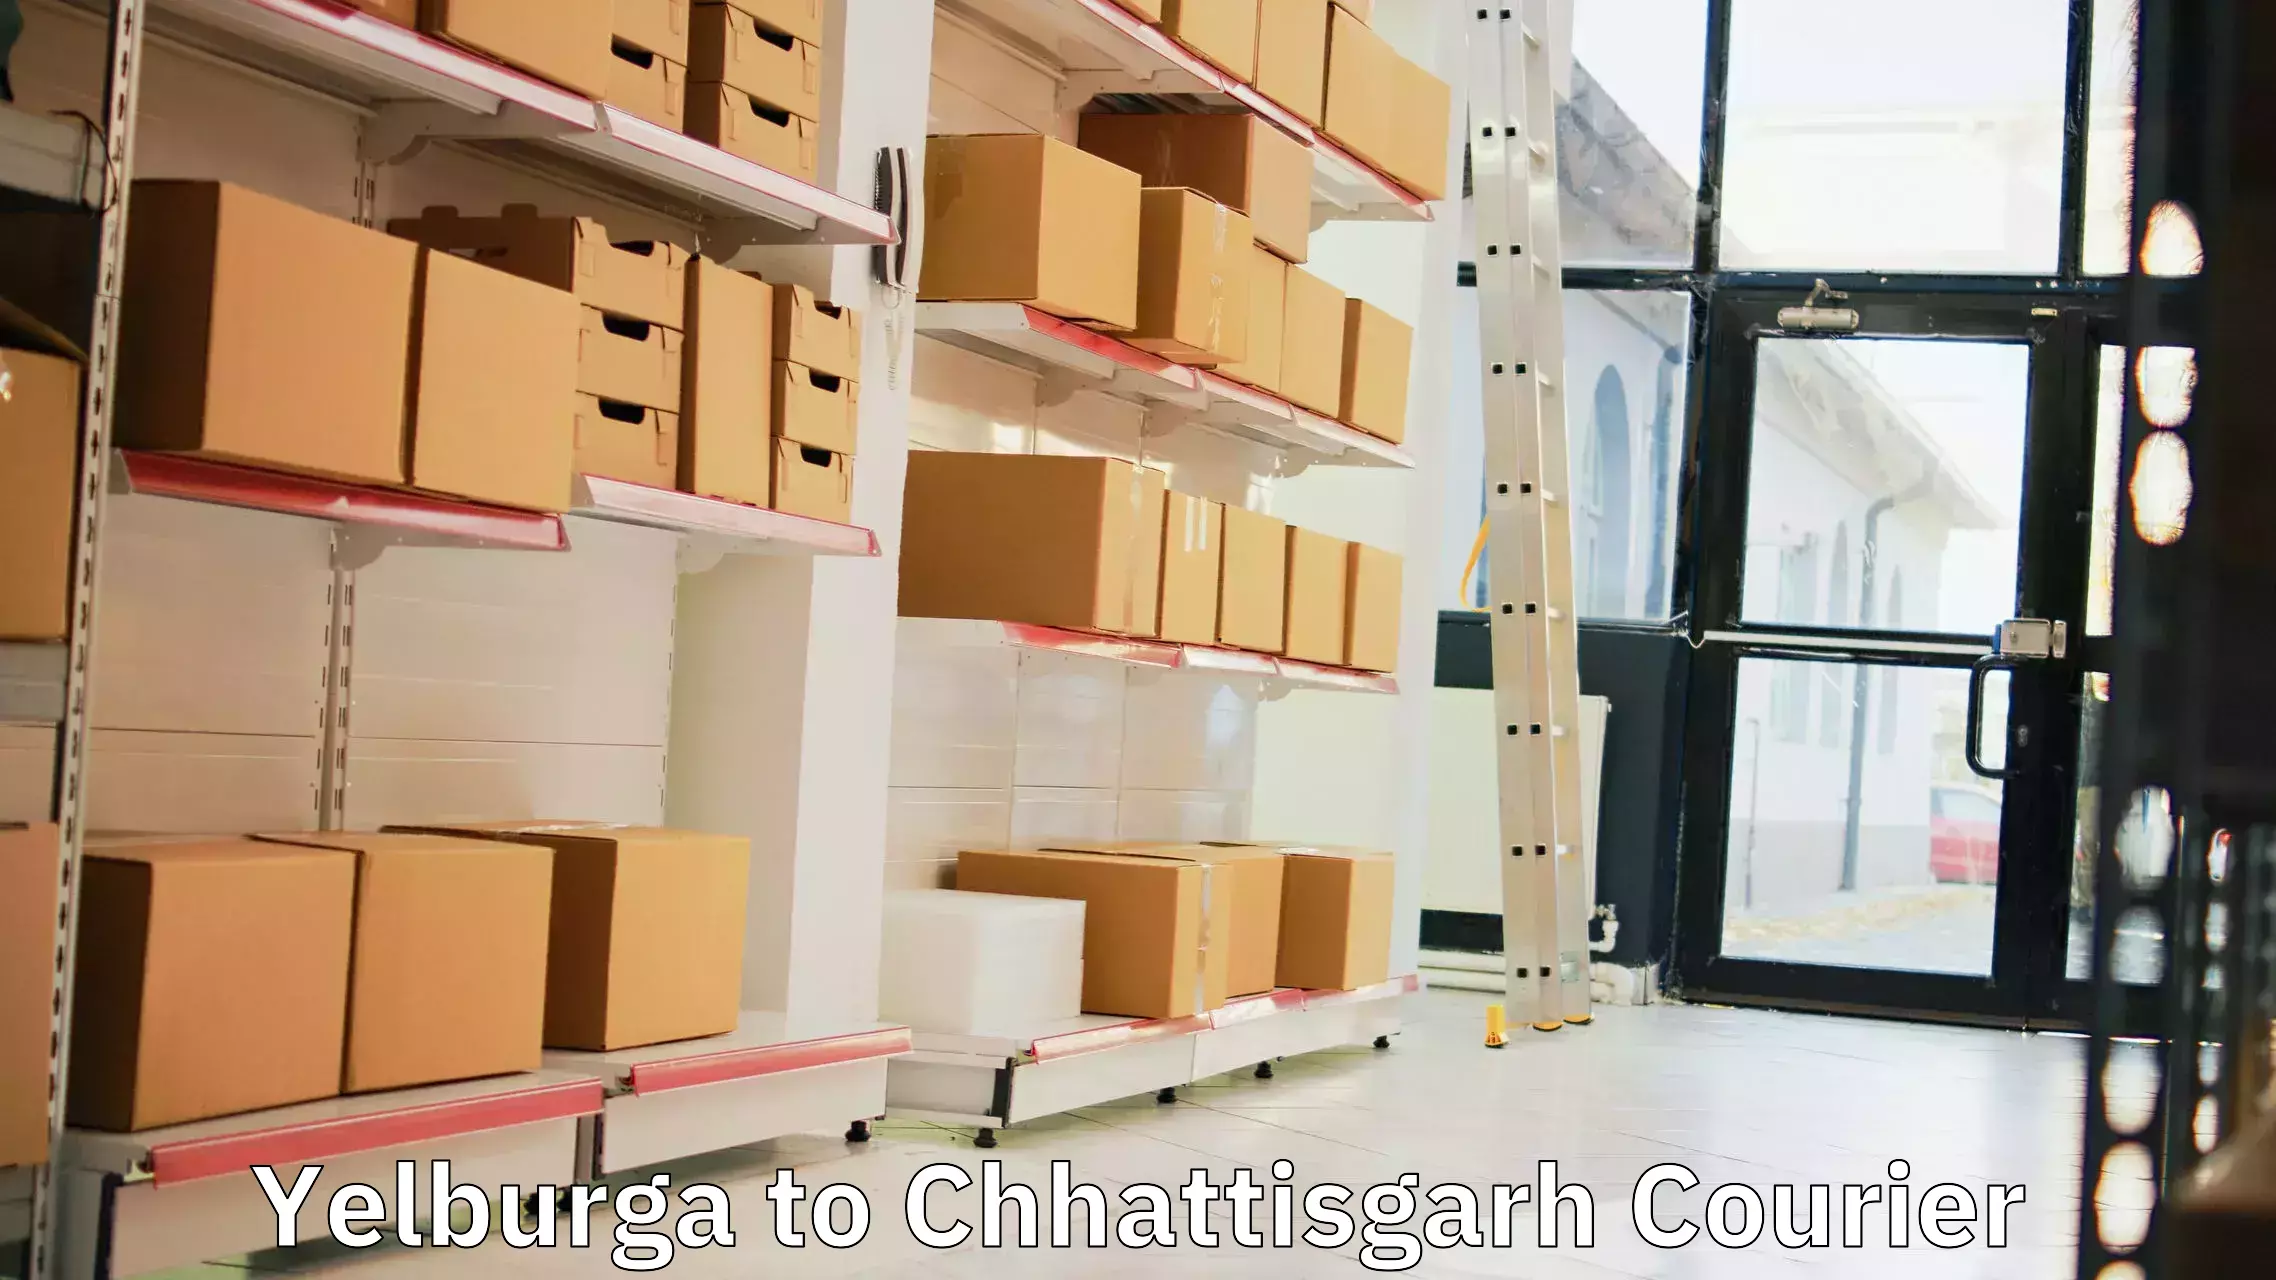 Medical delivery services in Yelburga to Chhattisgarh